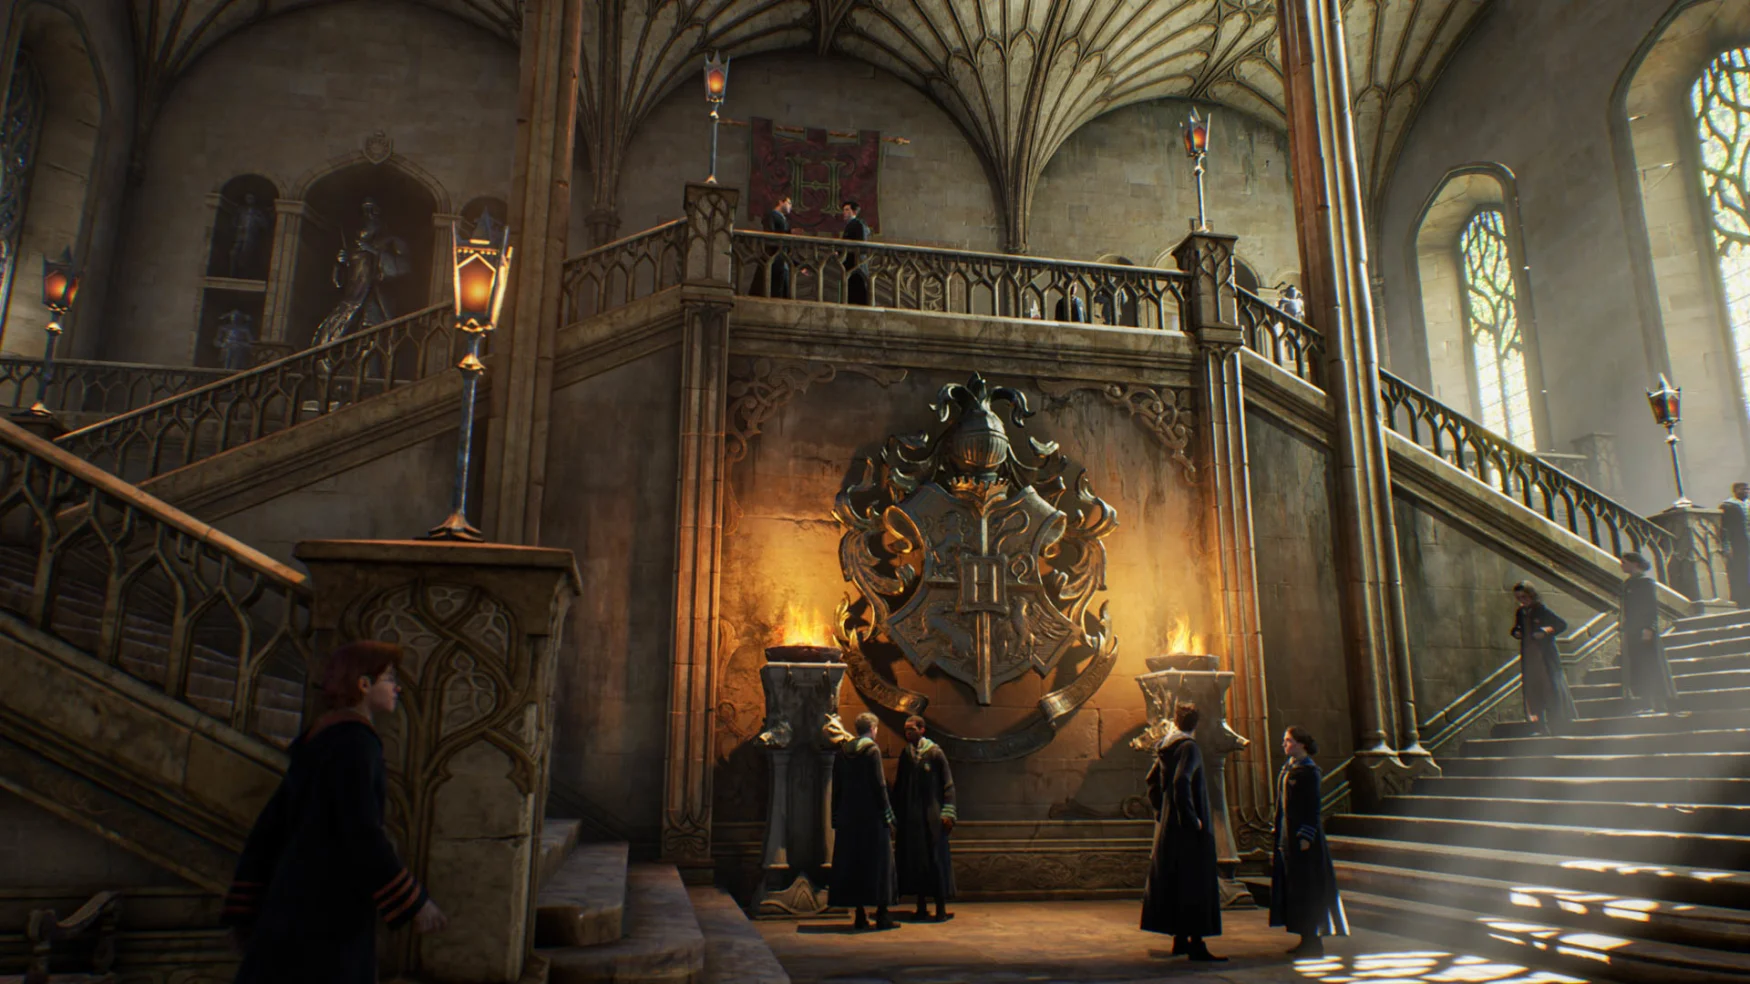 The Hogwarts main hall fills the space, with students filtering up twin staircases, the school crest large and lit by two fires on pedestals.